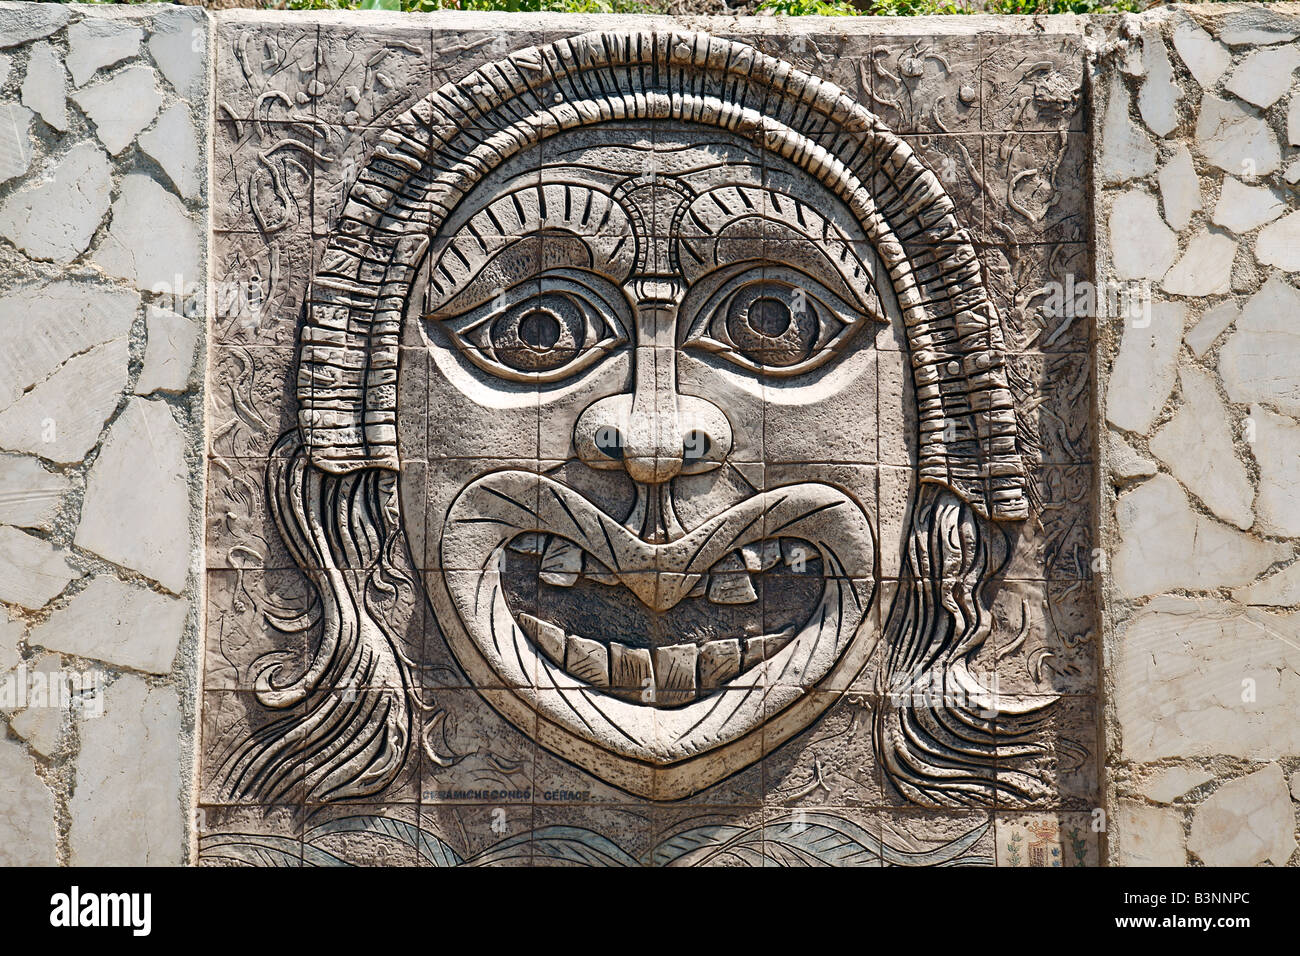 Italy, Calabria, Palmi, Province of Reggio Calabria, Viola Coast, Strait of Messina, Straits of Messina, mask at a wall, relief, grimace, visage, hideous face, snoot, mow, mowe, apotropaically, apotropaic, superstition, superstitiousness, bale, calamity, Stock Photo